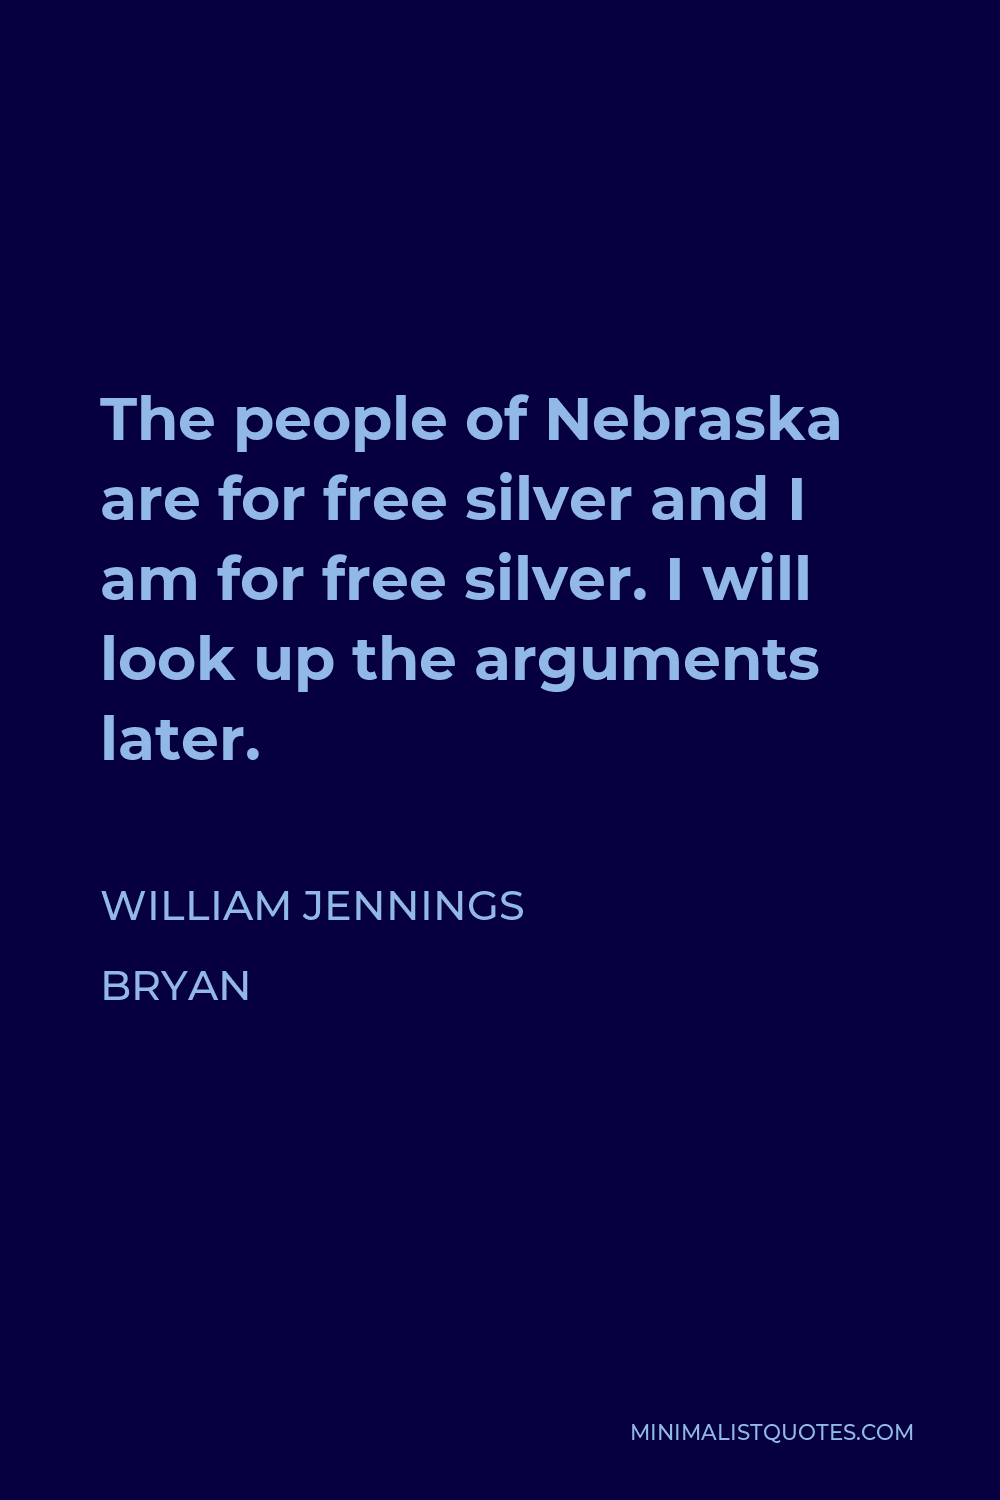 William Jennings Bryan Quote - The people of Nebraska are for free silver and I am for free silver. I will look up the arguments later.